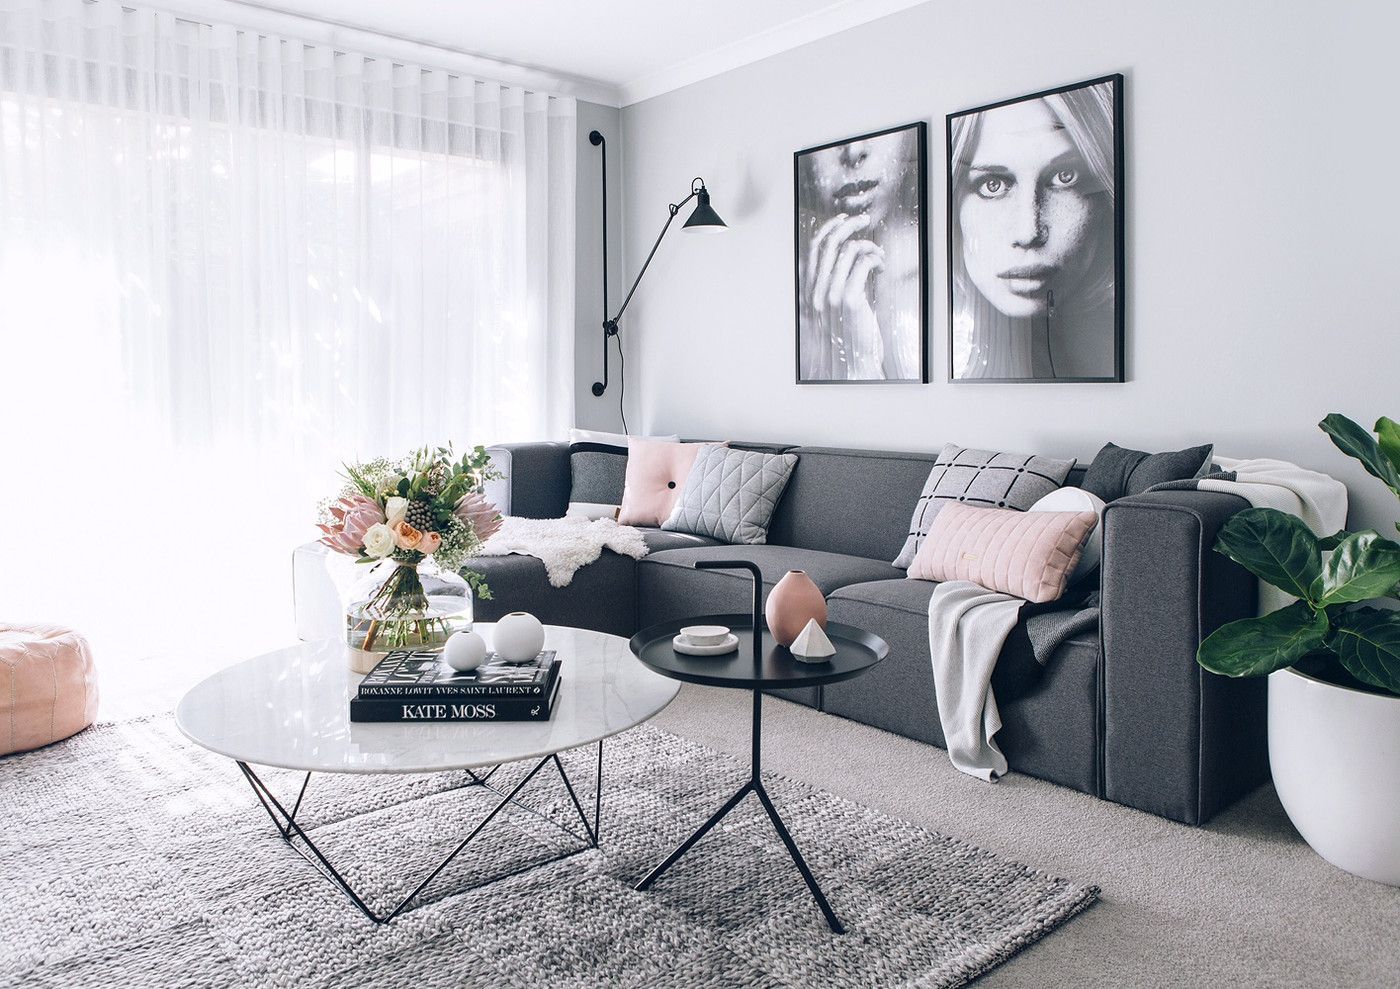 Immy and Indi is focused on sourcing the very best Scandinavian style homewares and marble products from both local Australian